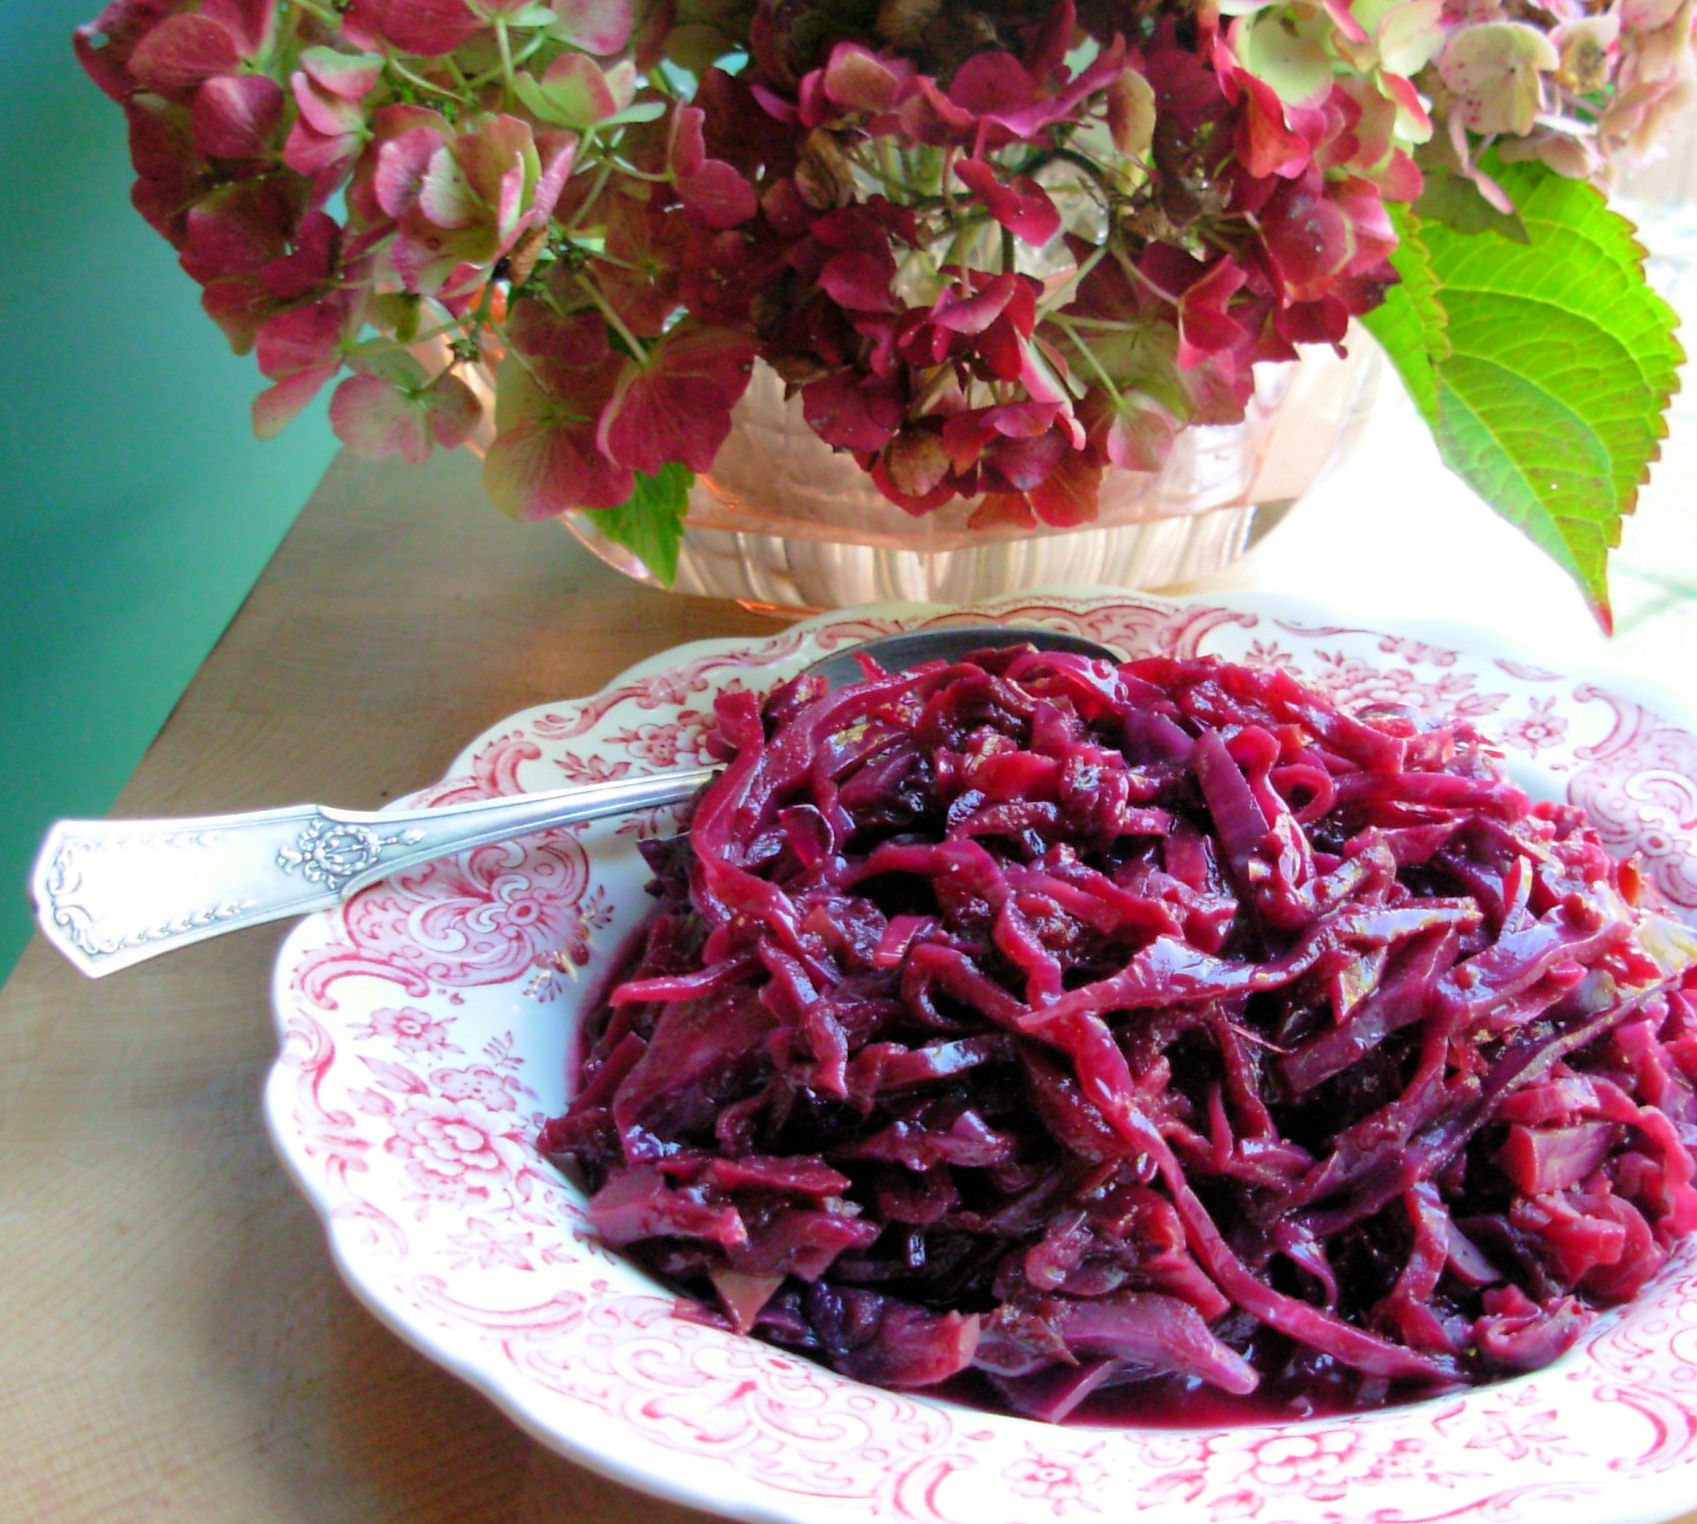 CROCK POT BAKED SPICED RED CABBAGE WITH APPLES OR PEARS